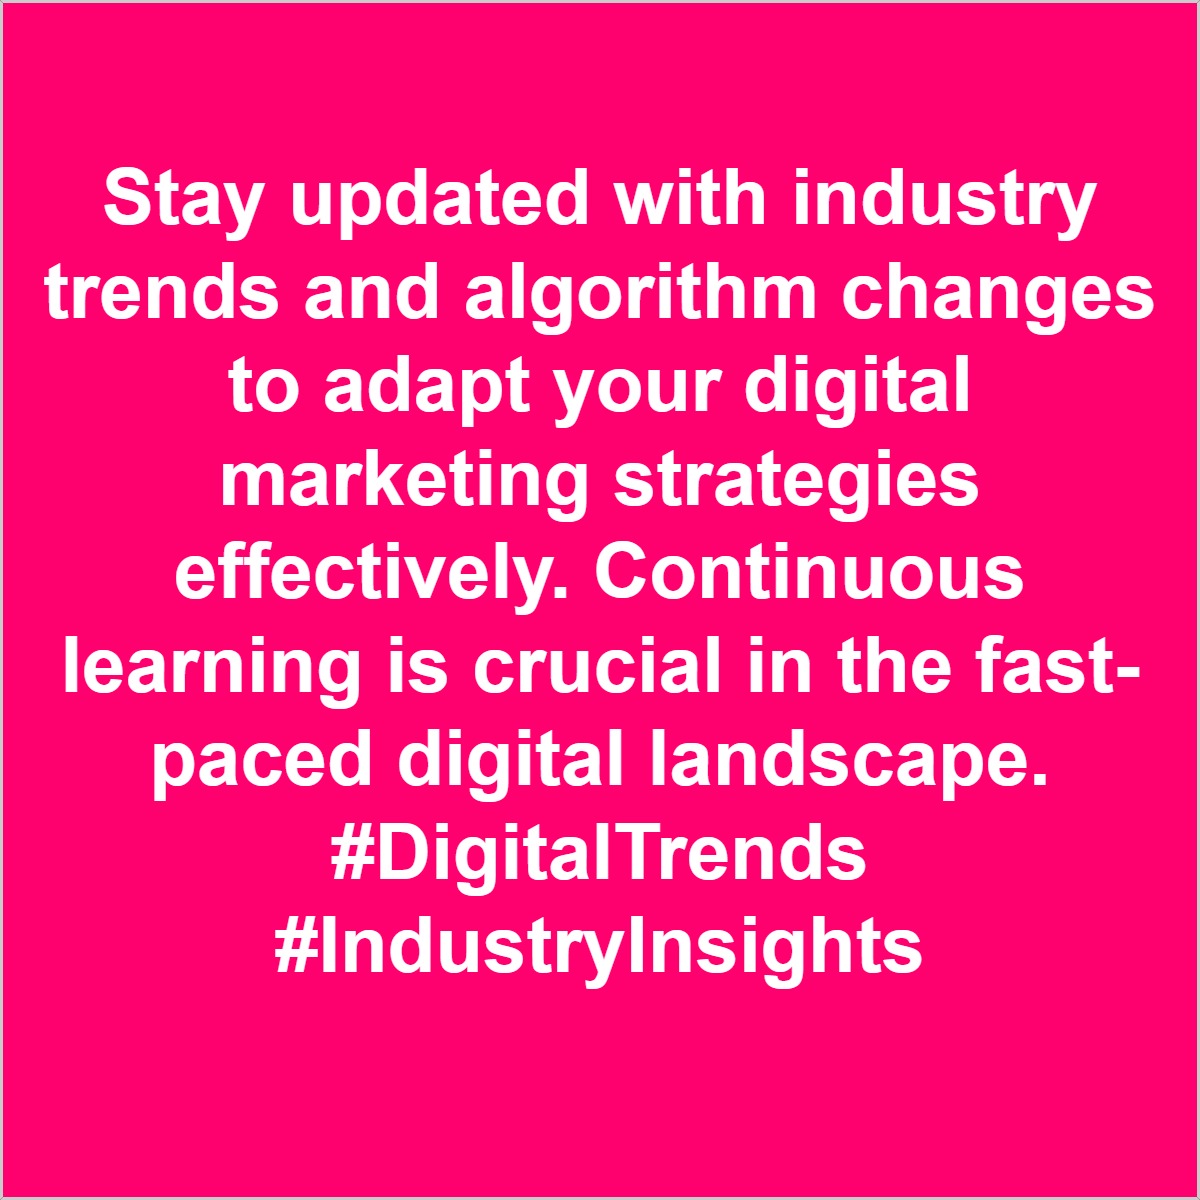 Stay updated with industry trends and algorithm changes to adapt your digital marketing strategies effectively. Continuous learning is crucial in the fast-paced digital landscape. #DigitalTrends #IndustryInsights matterhornsolutions.ca